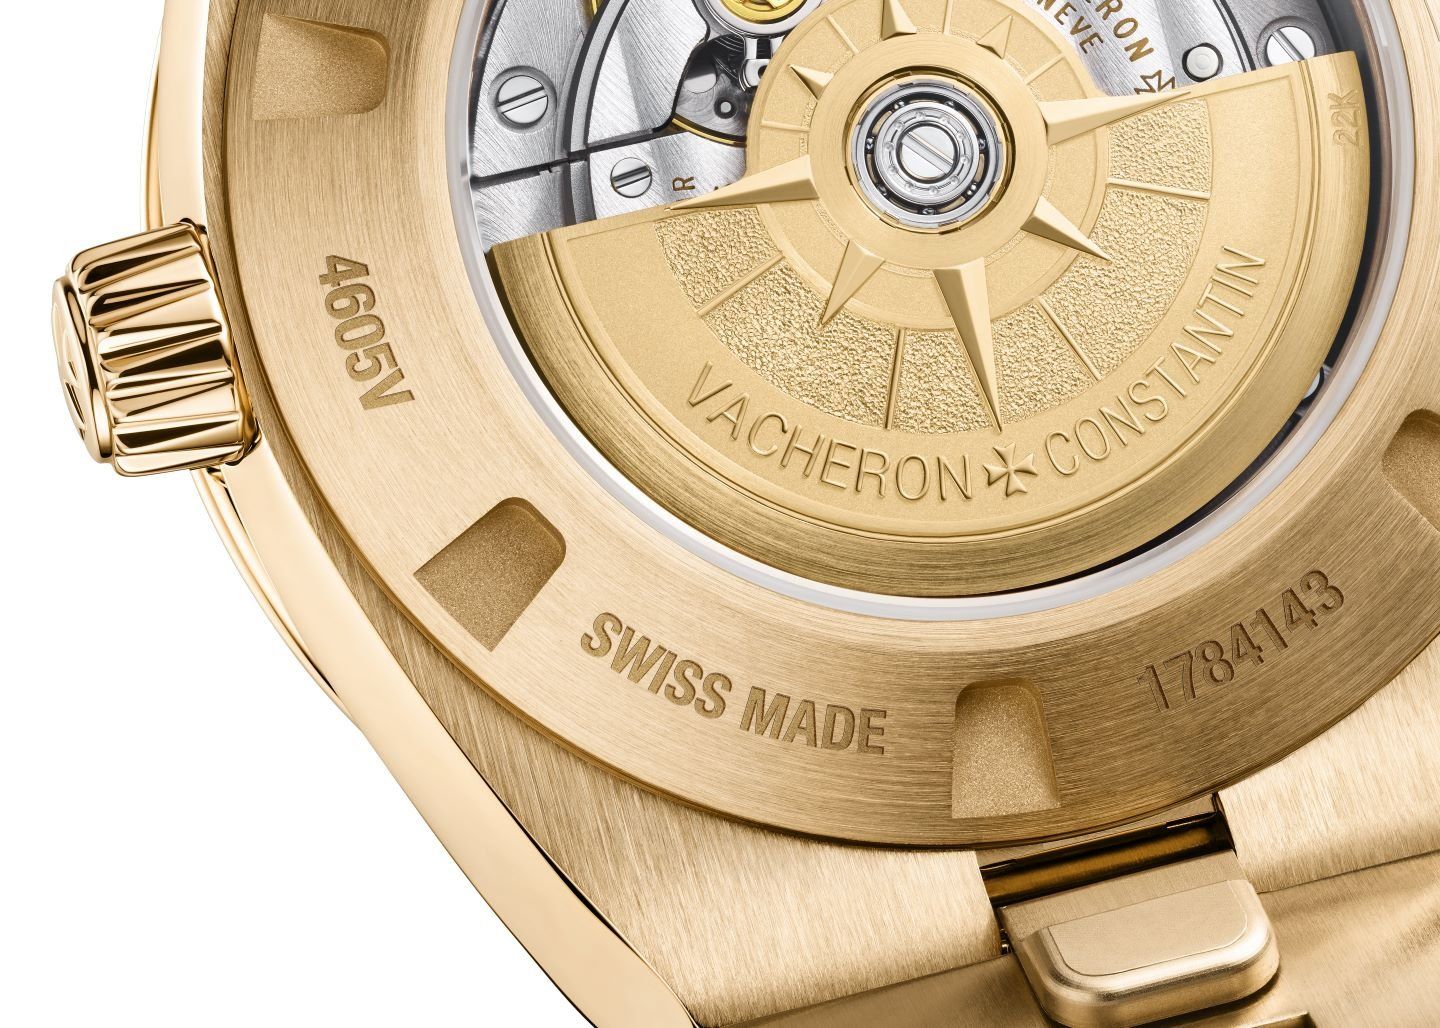 The rear bridges are adorned with Côtes de Genève, while the collection’s emblematic rotor is sculpted in gold and graced with a compass rose.